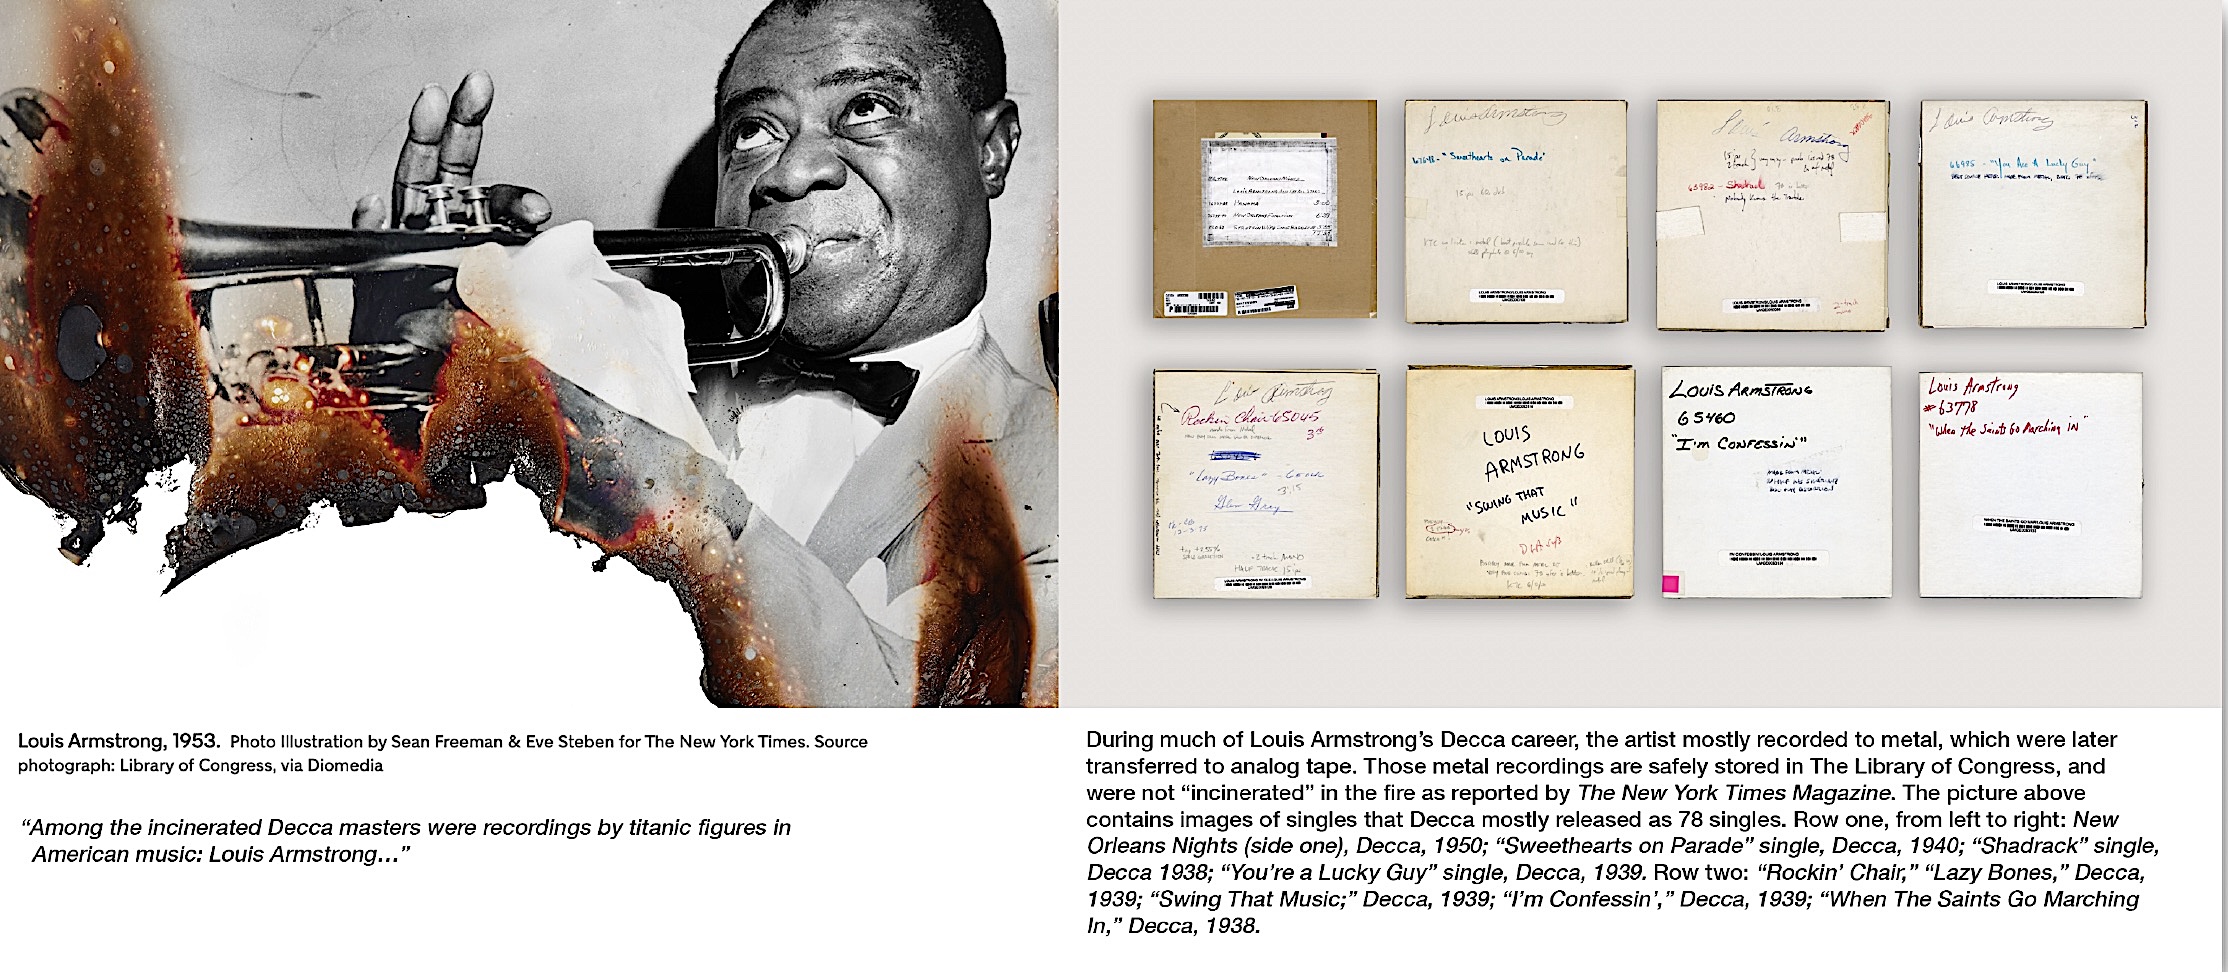 Louis Armstrong master tapes